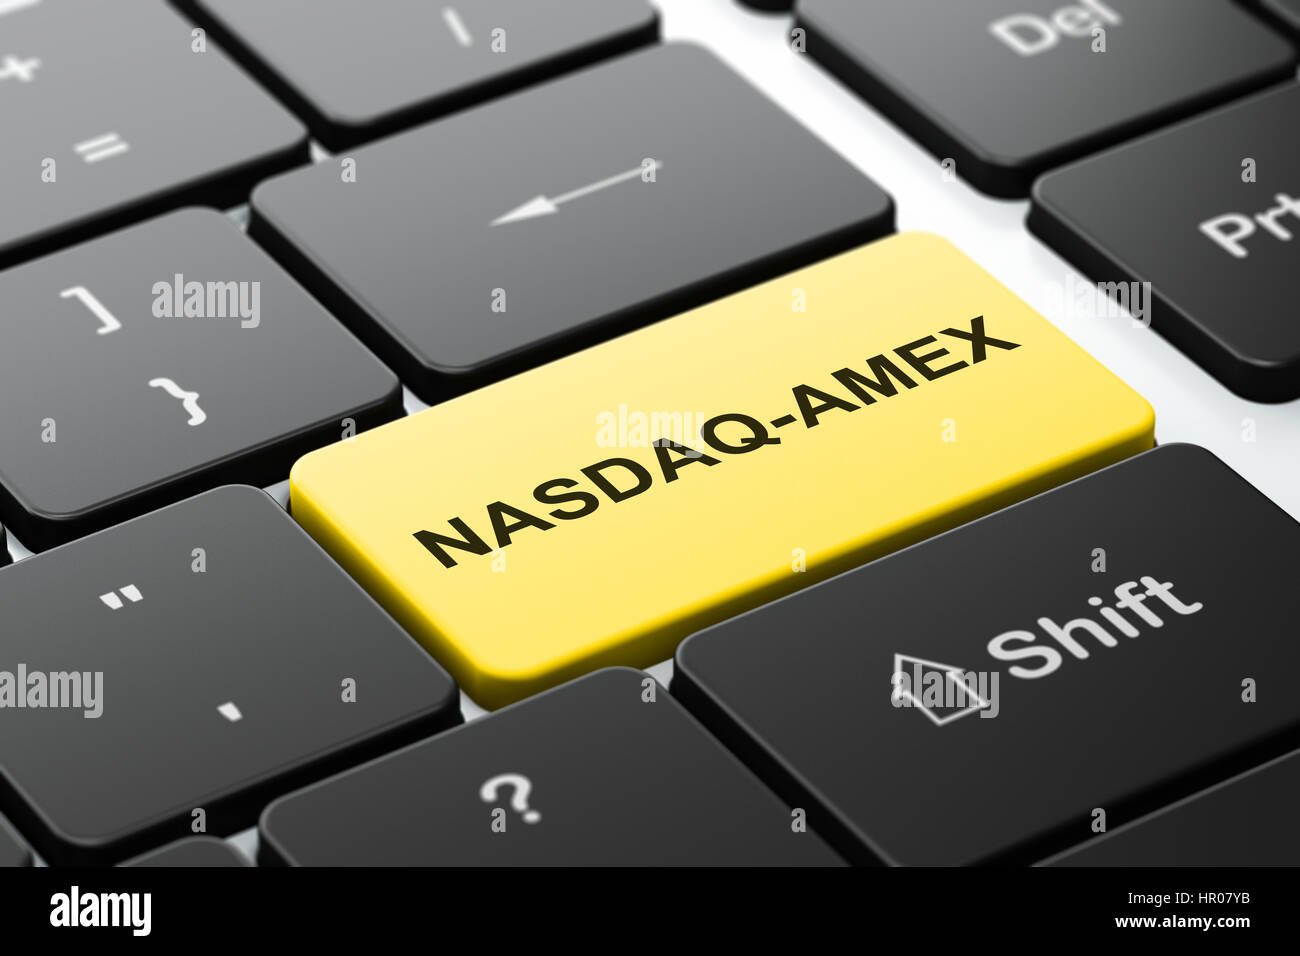 Stock market indexes concept: NASDAQ-AMEX on computer keyboard background Stock Photo